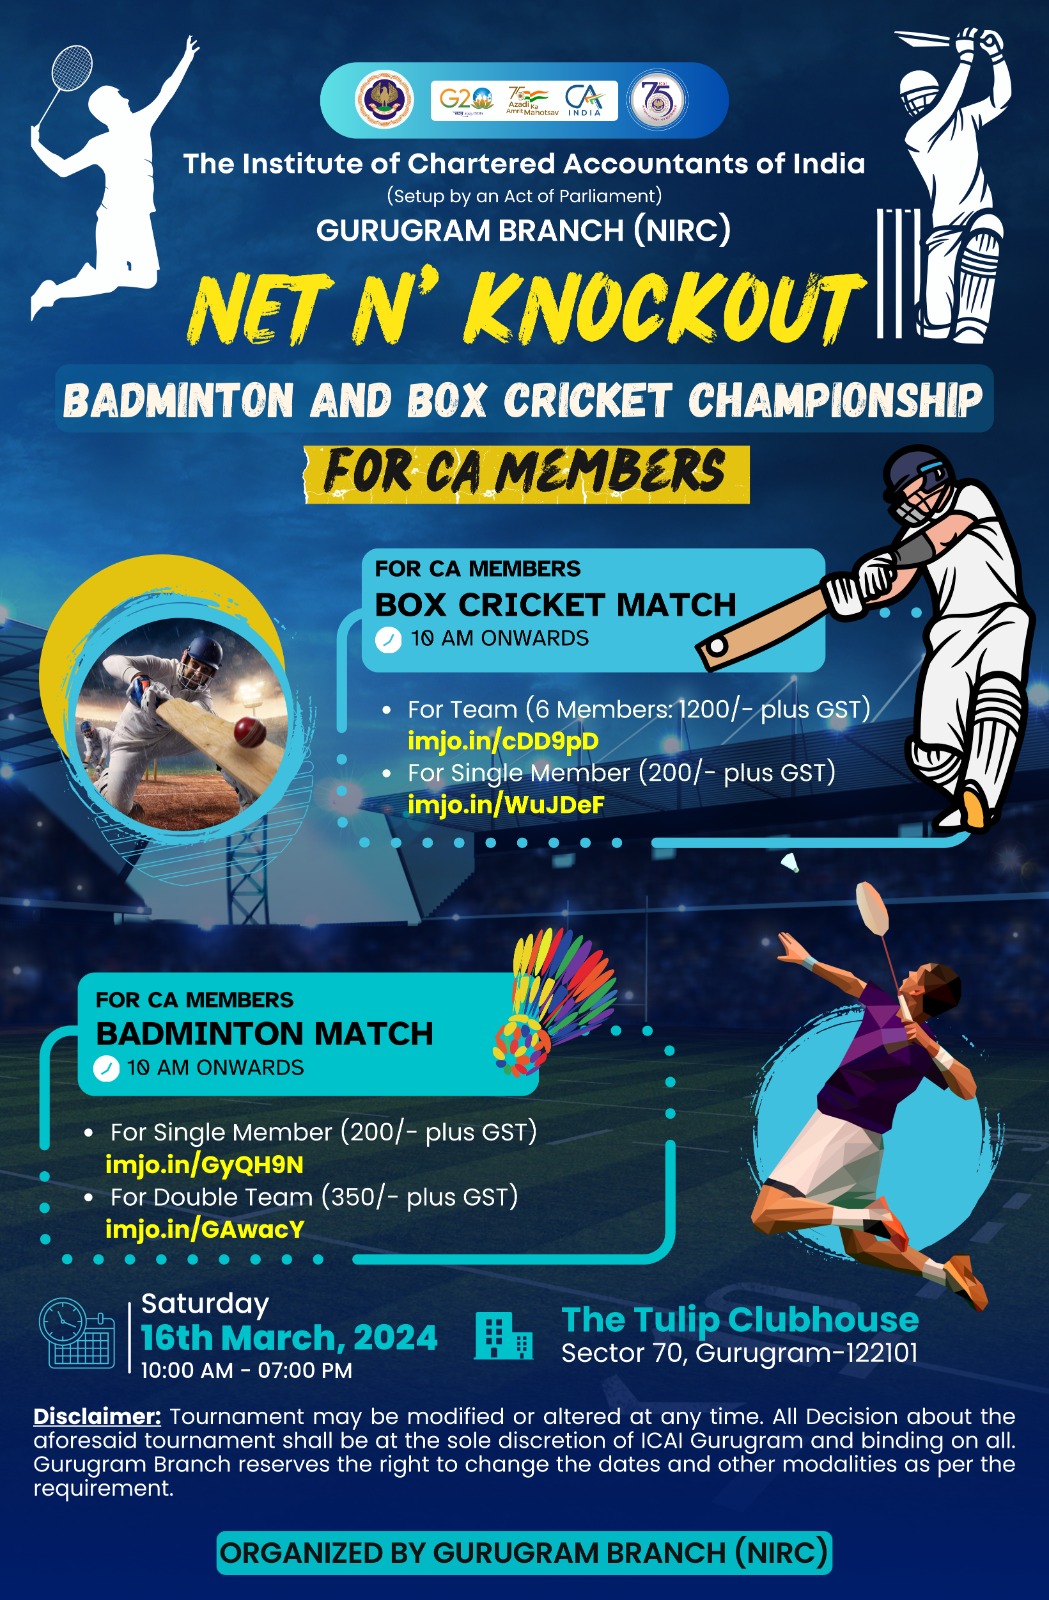 "Net N' Knockout: Badminton and Box Cricket Championship